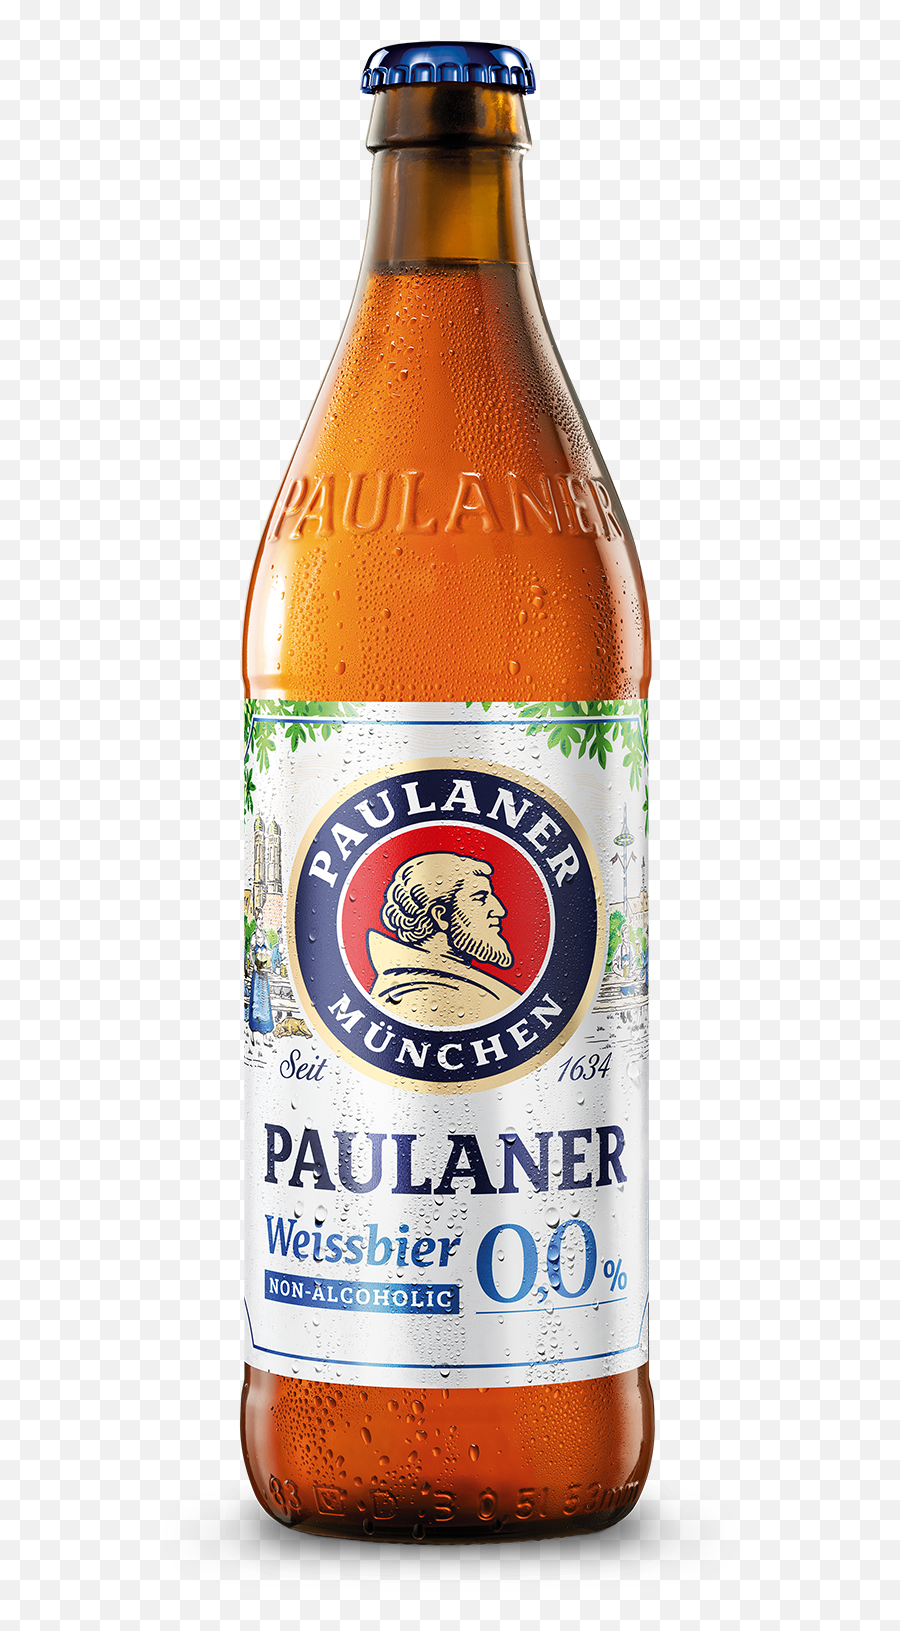 Fc Bayern München - Paulaner Weissbier Non Alcoholic Emoji,Types Of Emotions In Beer Commercials